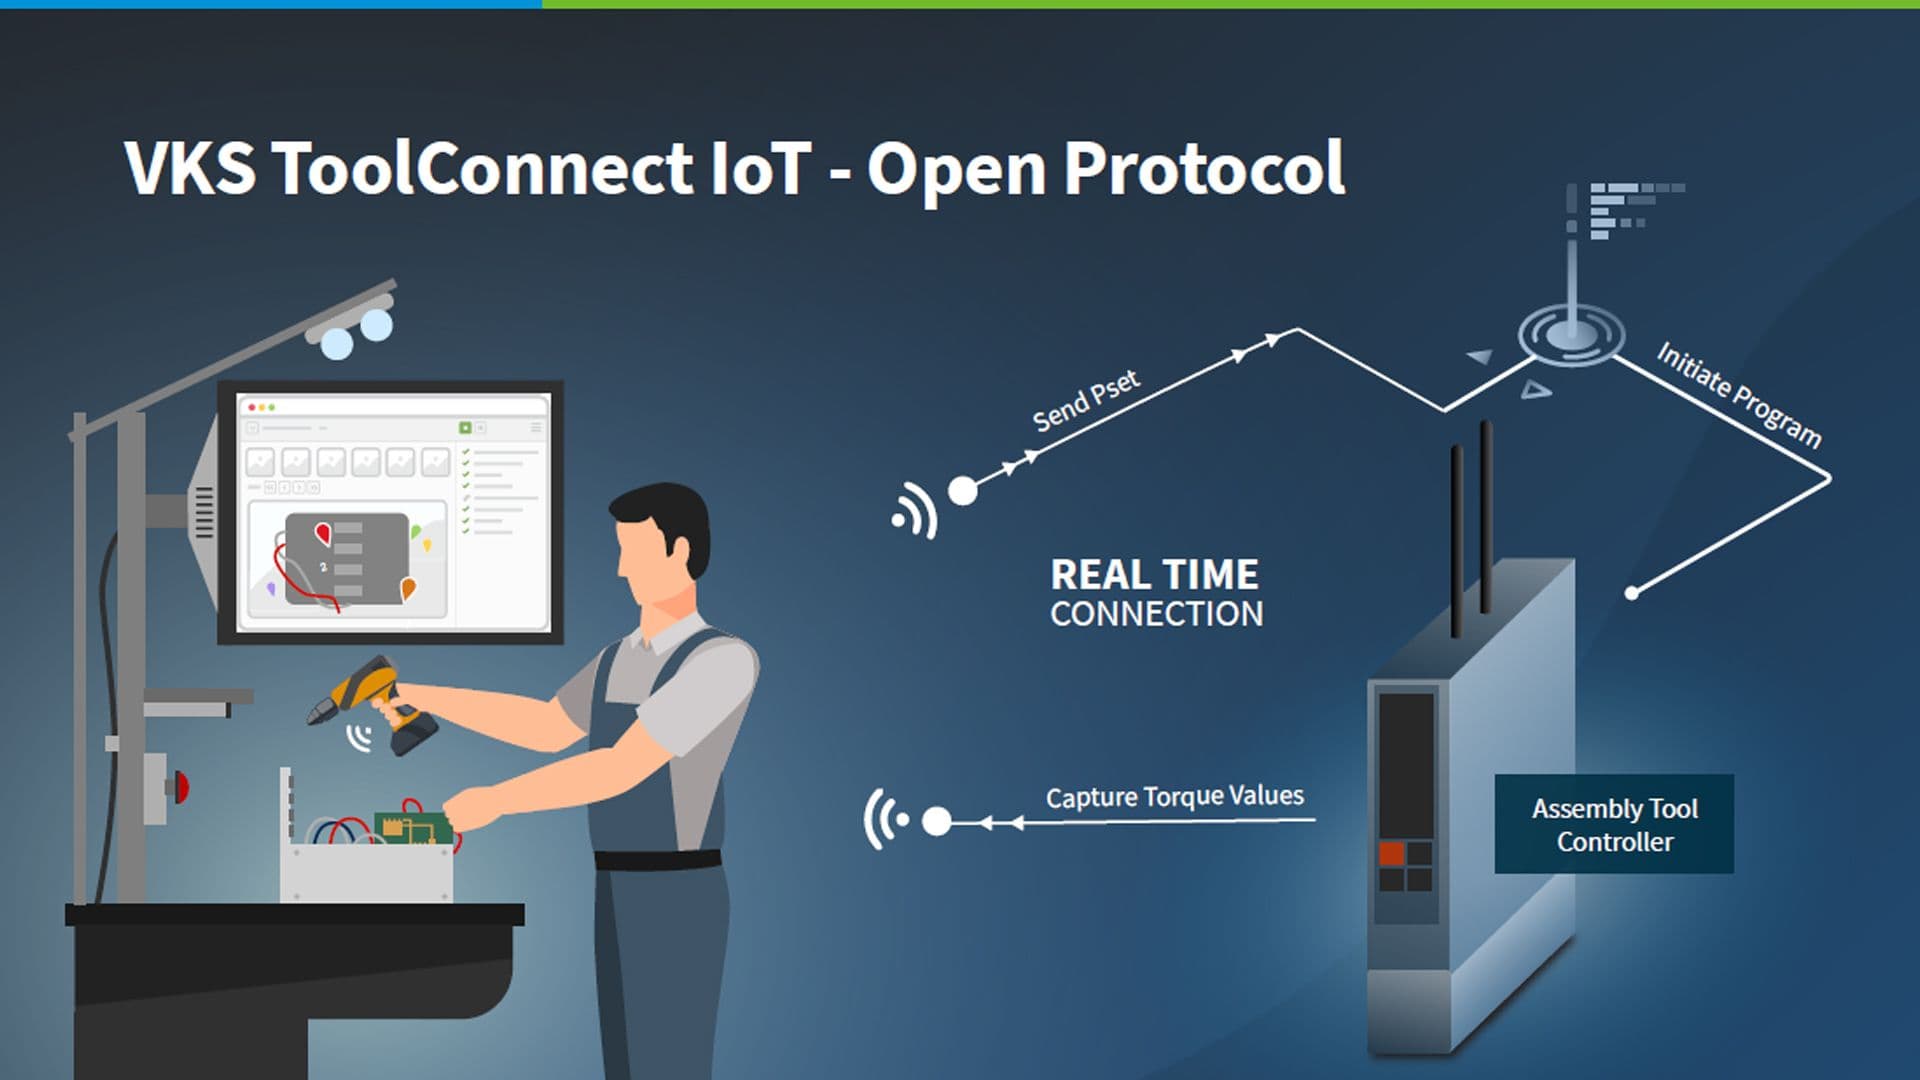 ToolConnect IoT Upgrade - A Giant Leap for Connected Workers